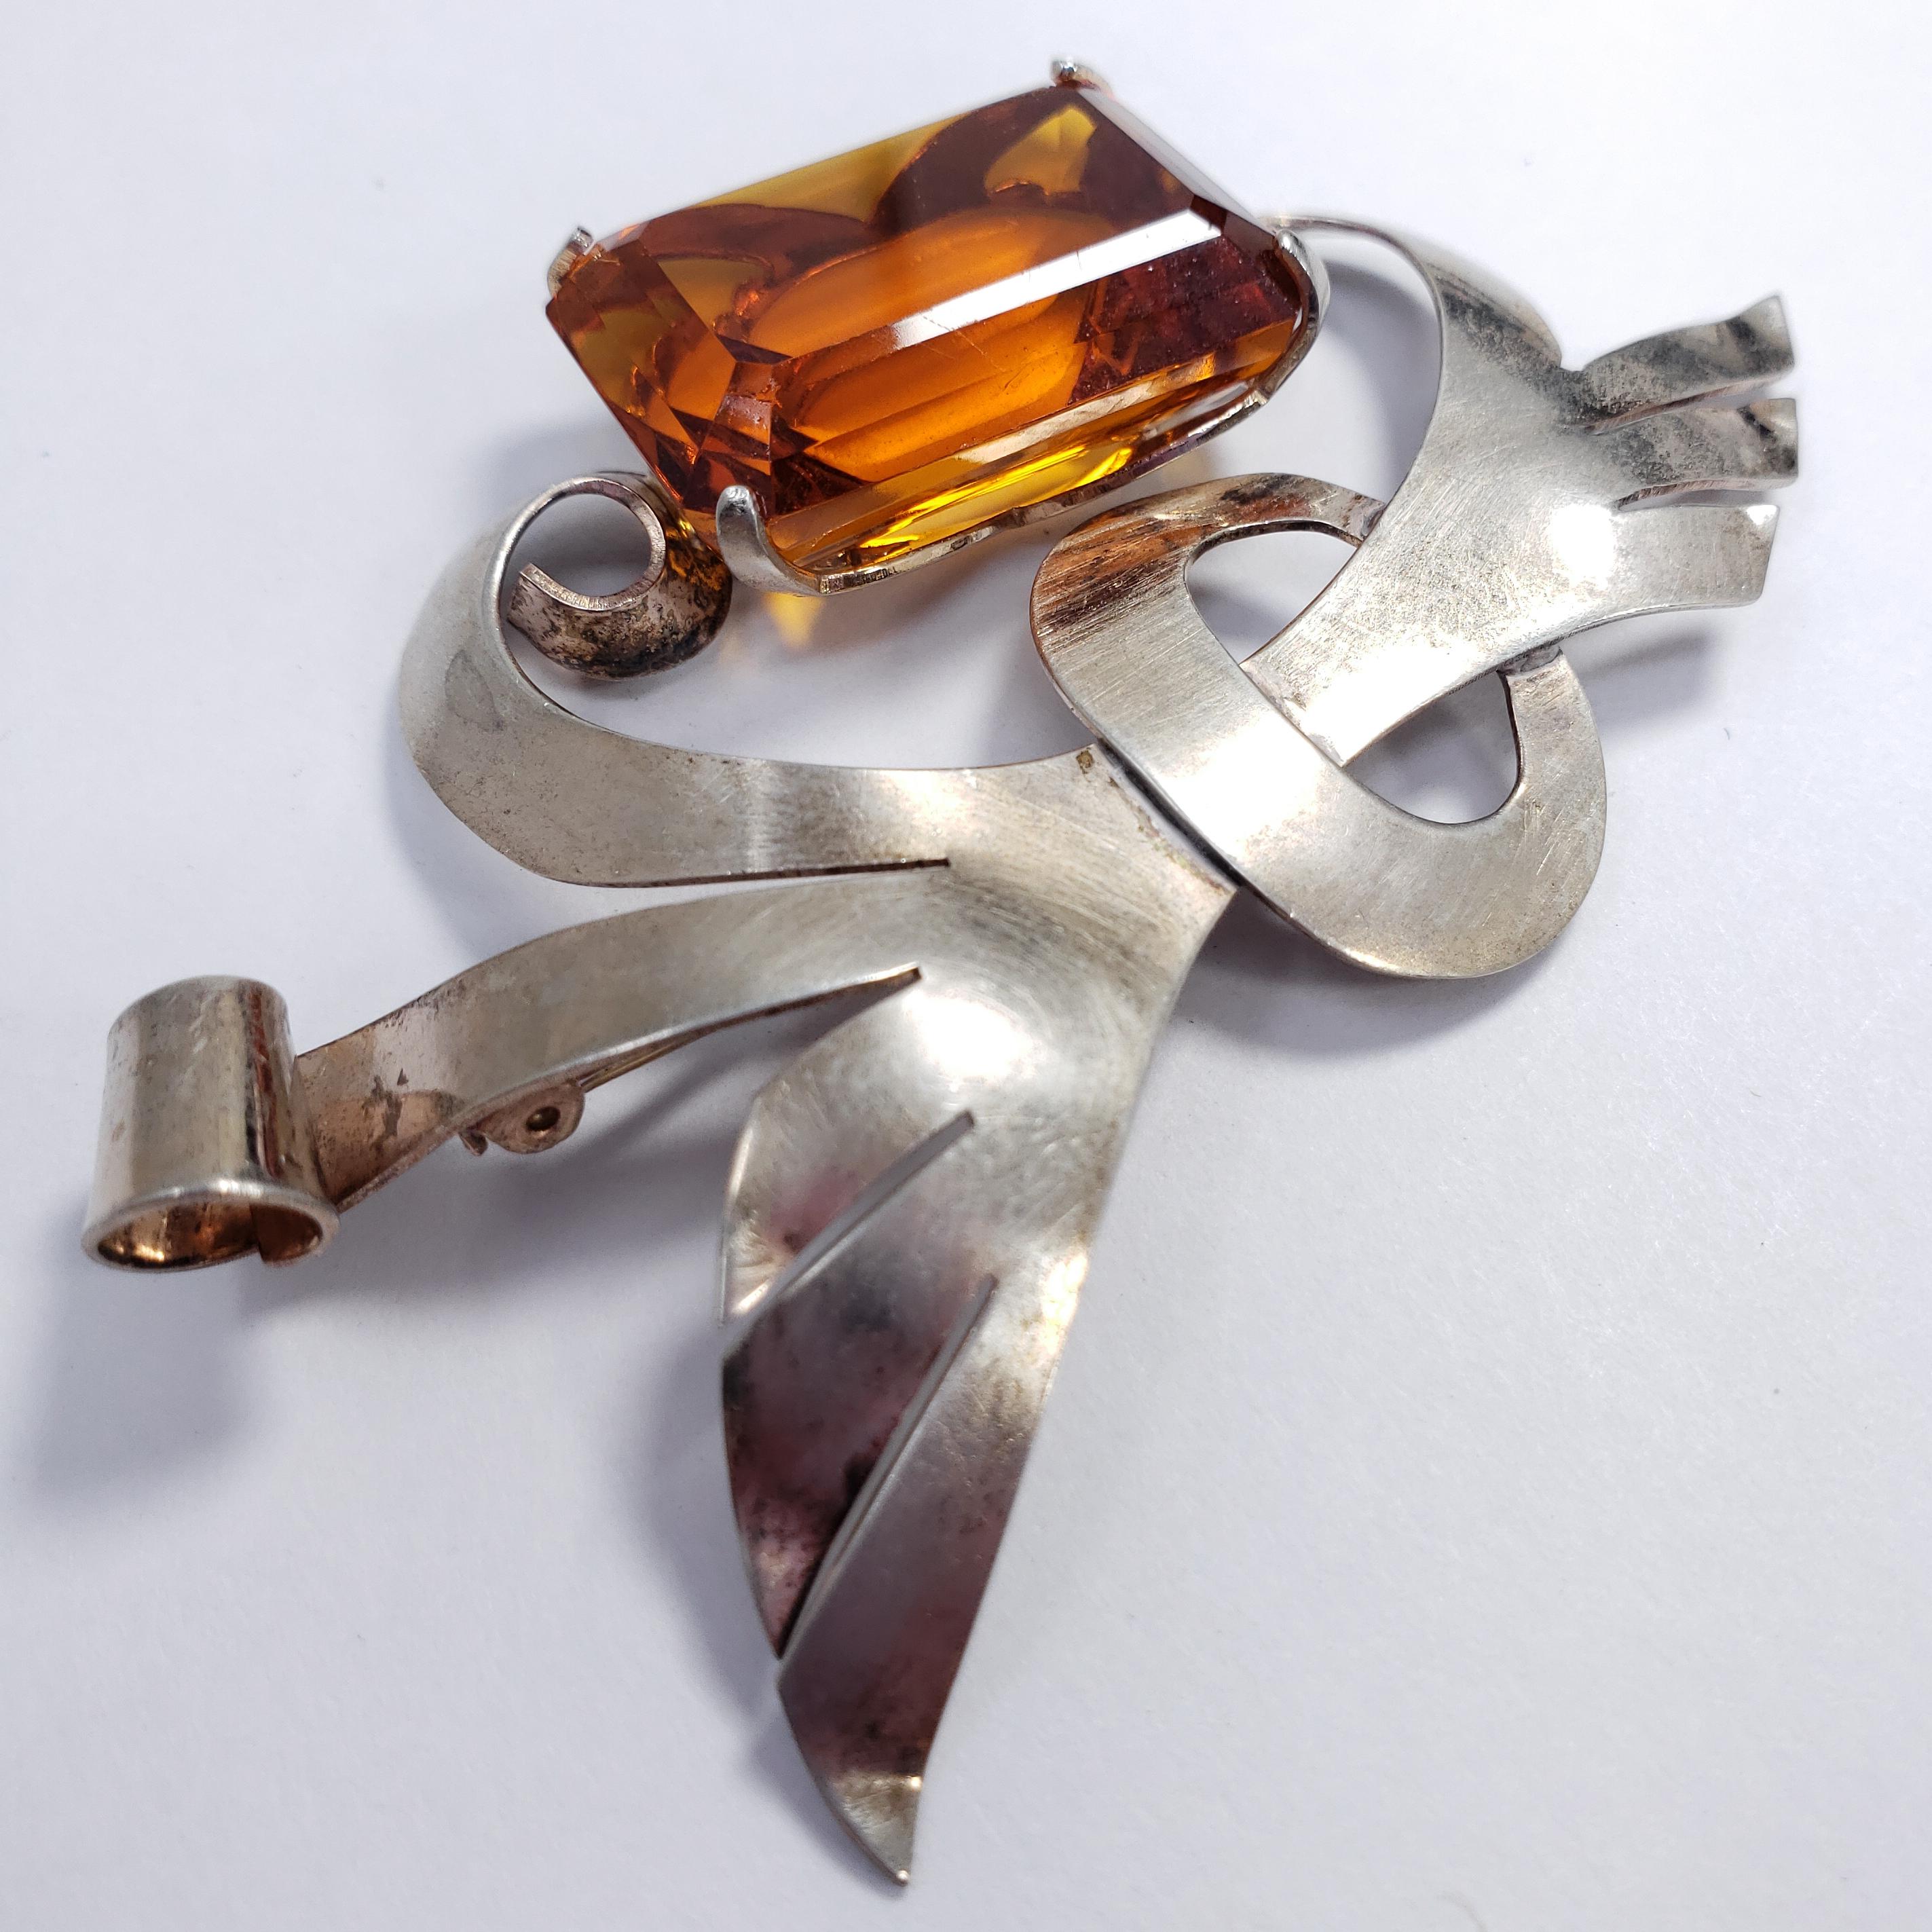 Lampl Sterling Silver Decorative Bow Motif Pin Brooch With Large Orange Crystal In Fair Condition For Sale In Milford, DE